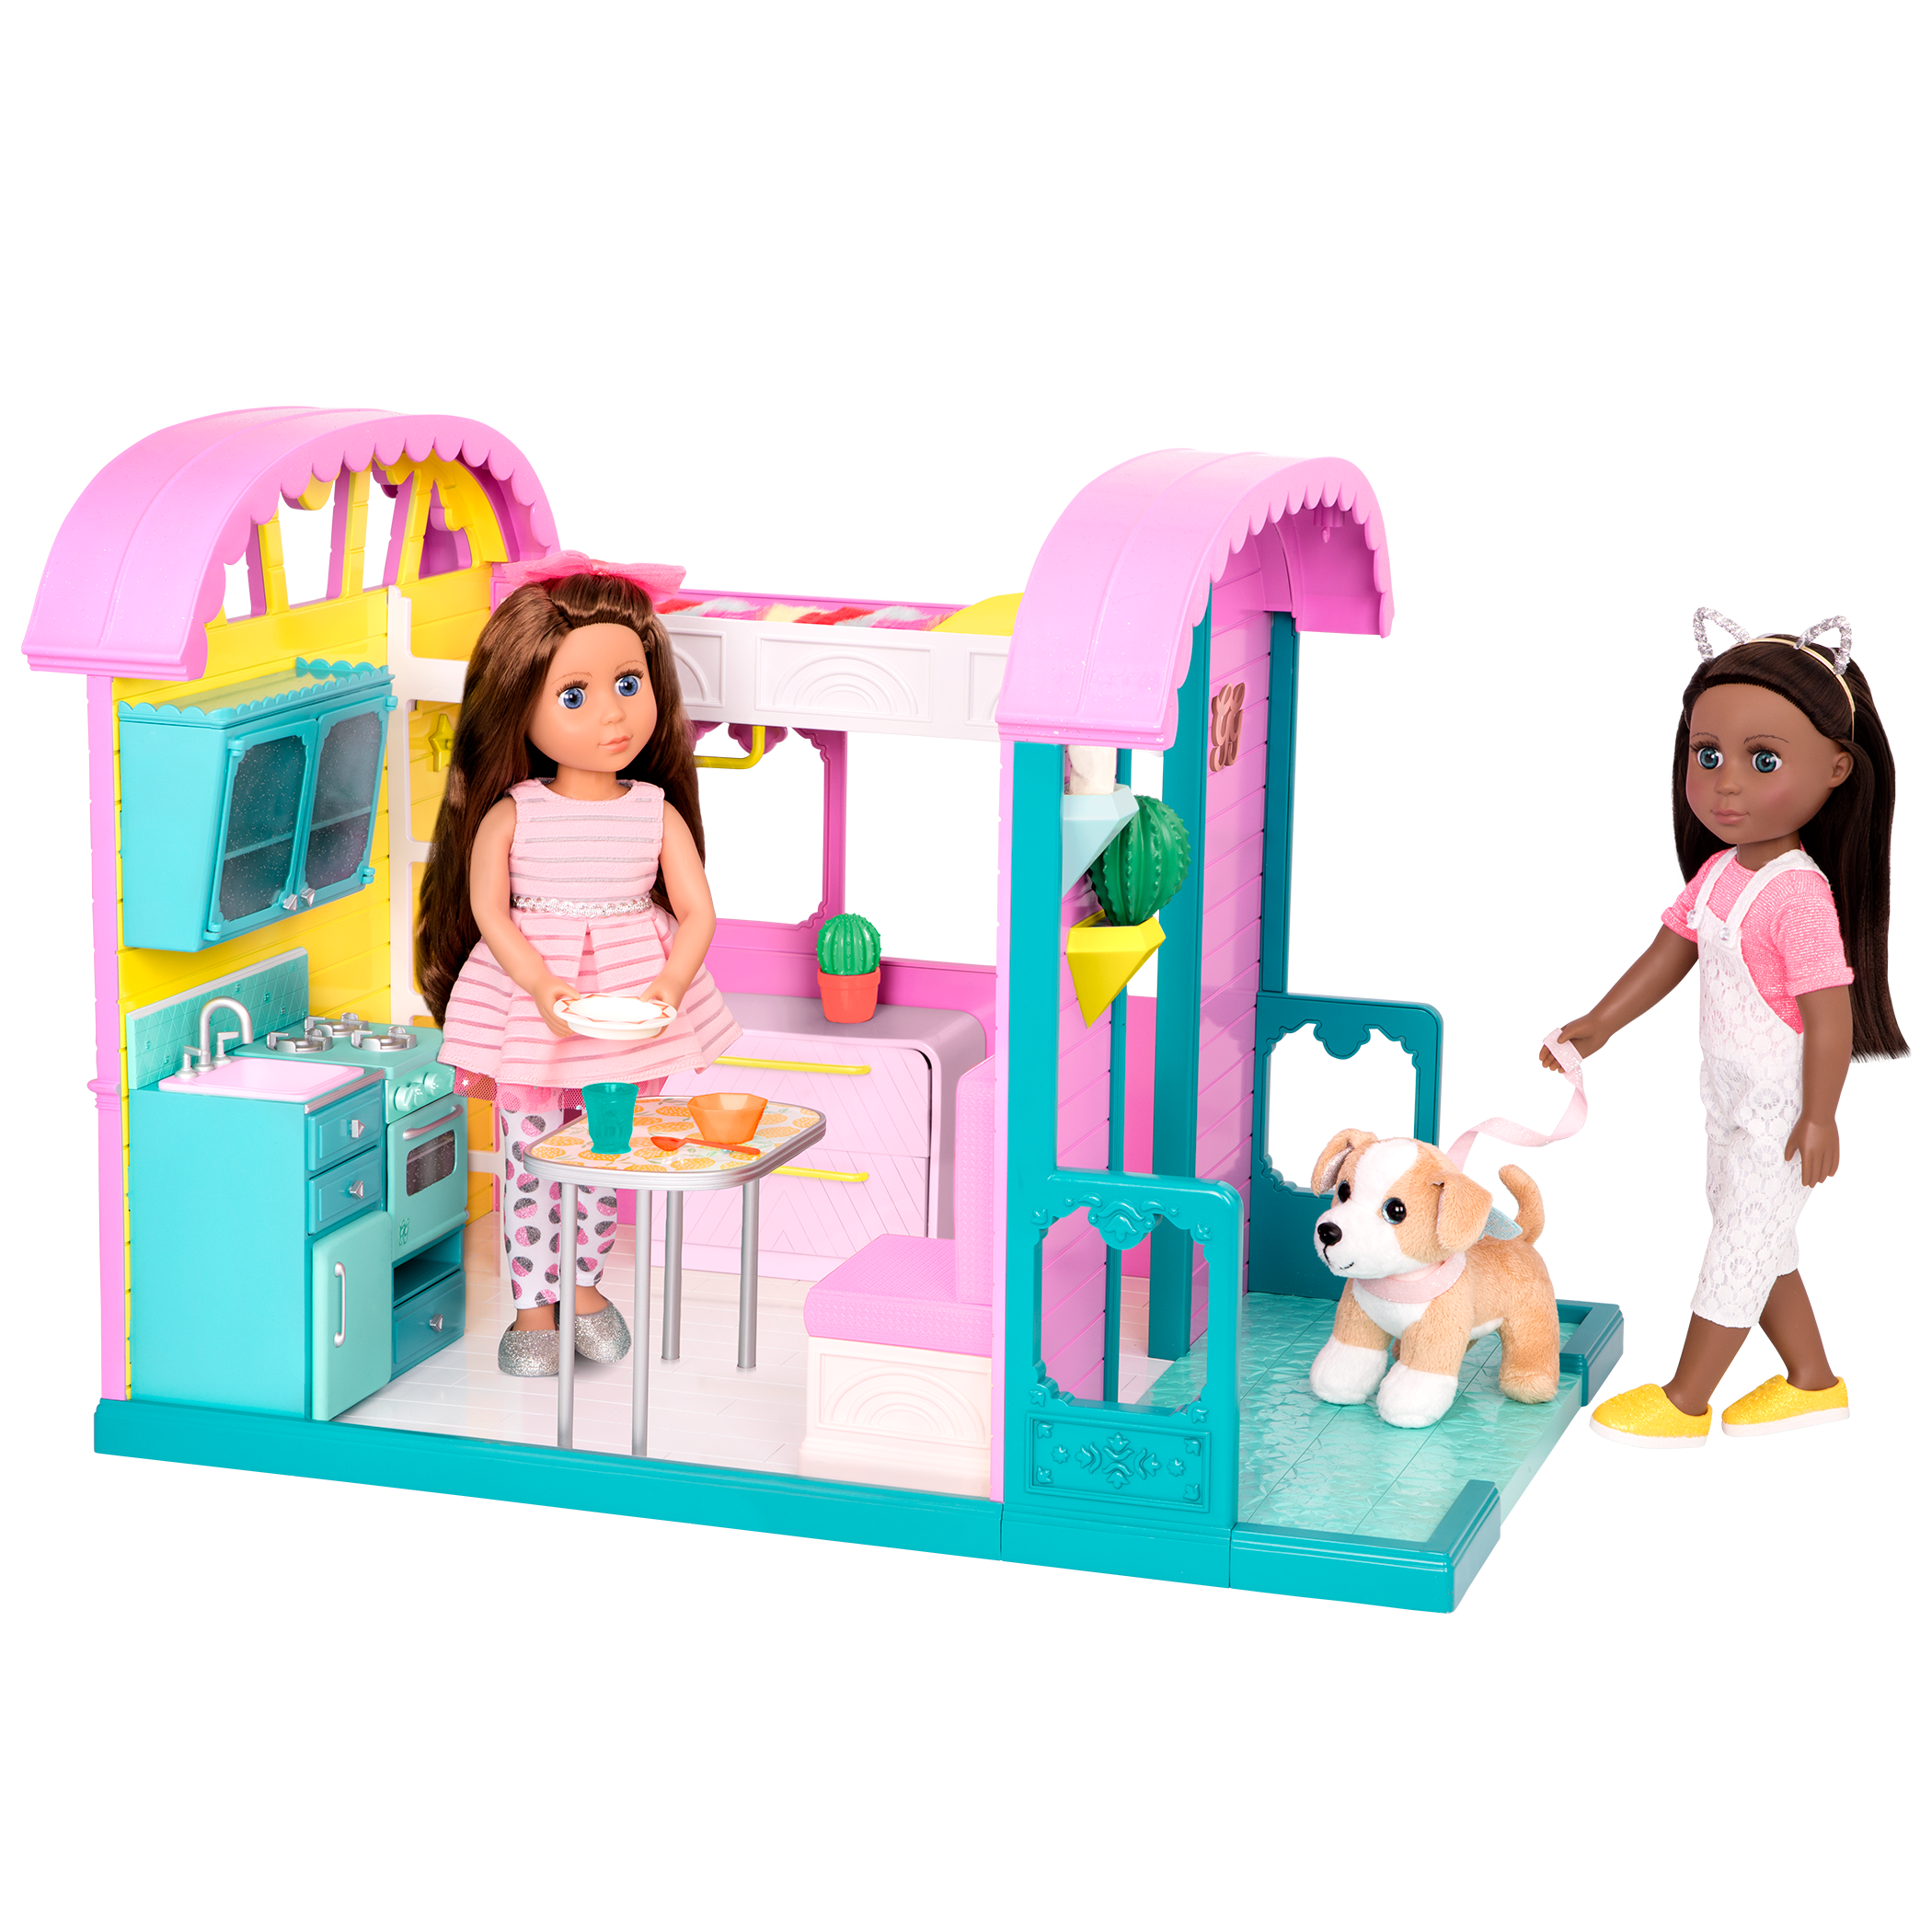 Glitter Girls Doll Clothes and Accessories in Dolls & Dollhouses